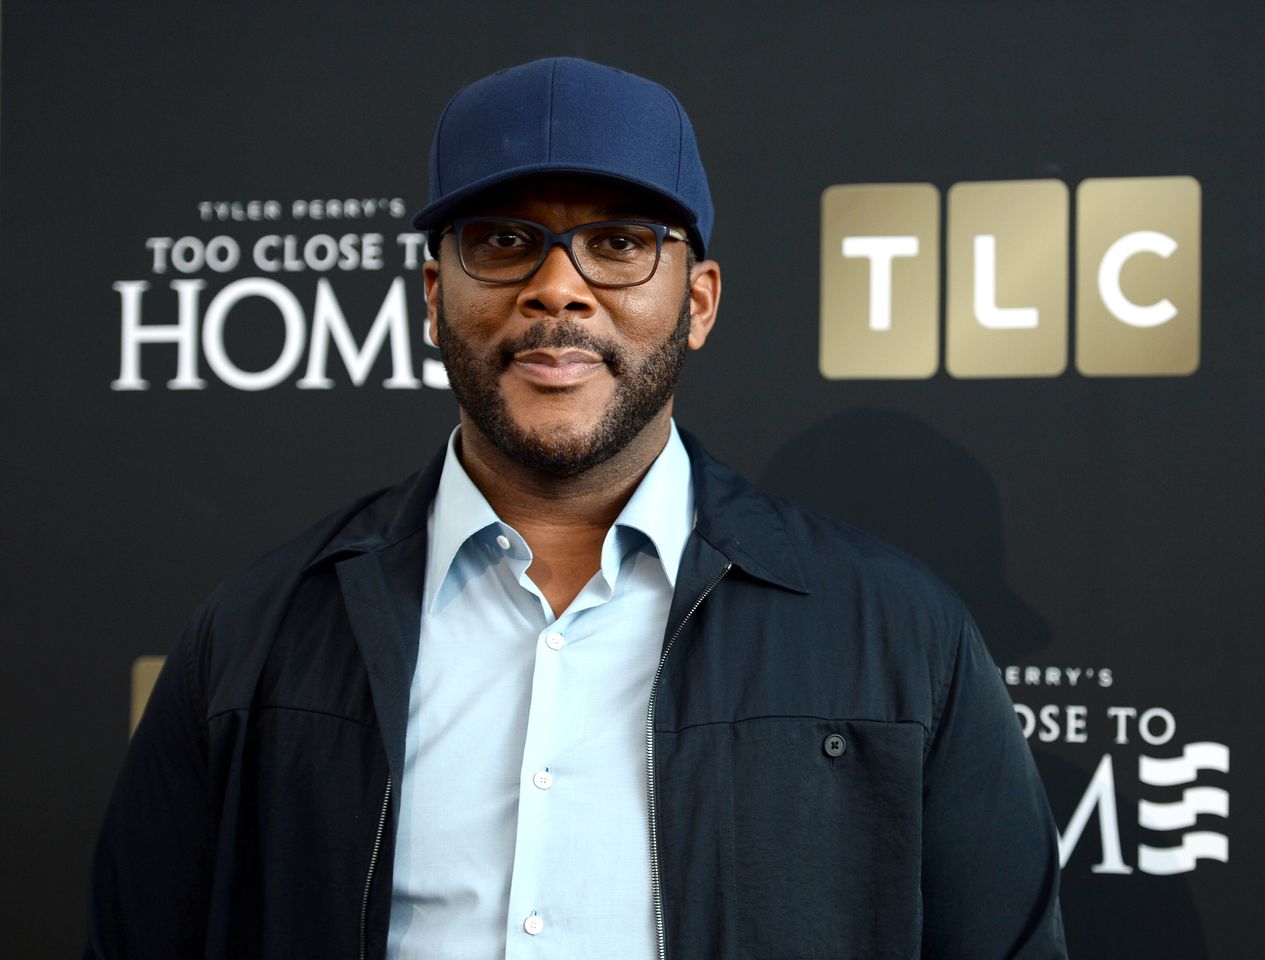 Tyler Perry at TLC's "Too Close To Home" screening on August 16, 2016. | Photo: Getty Images